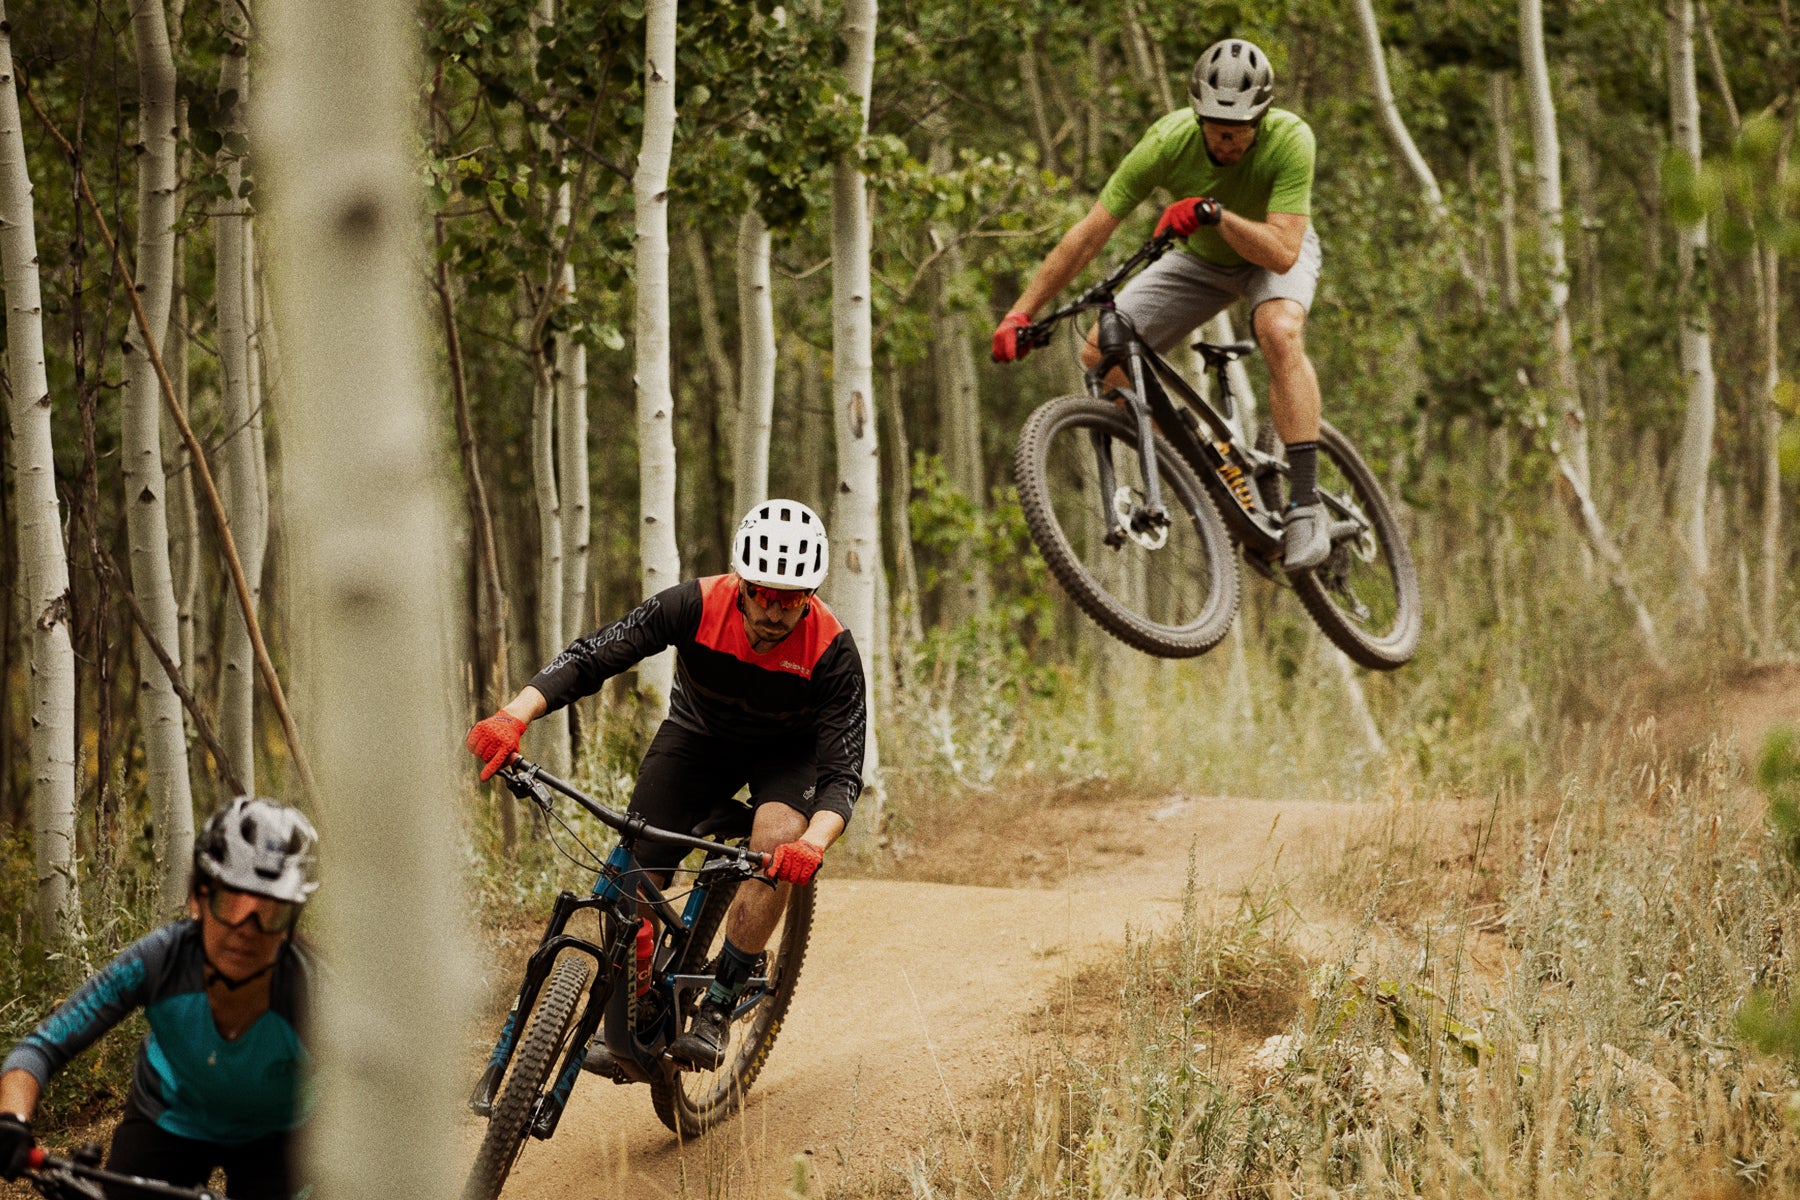 Mountain bike riding gear and apparel